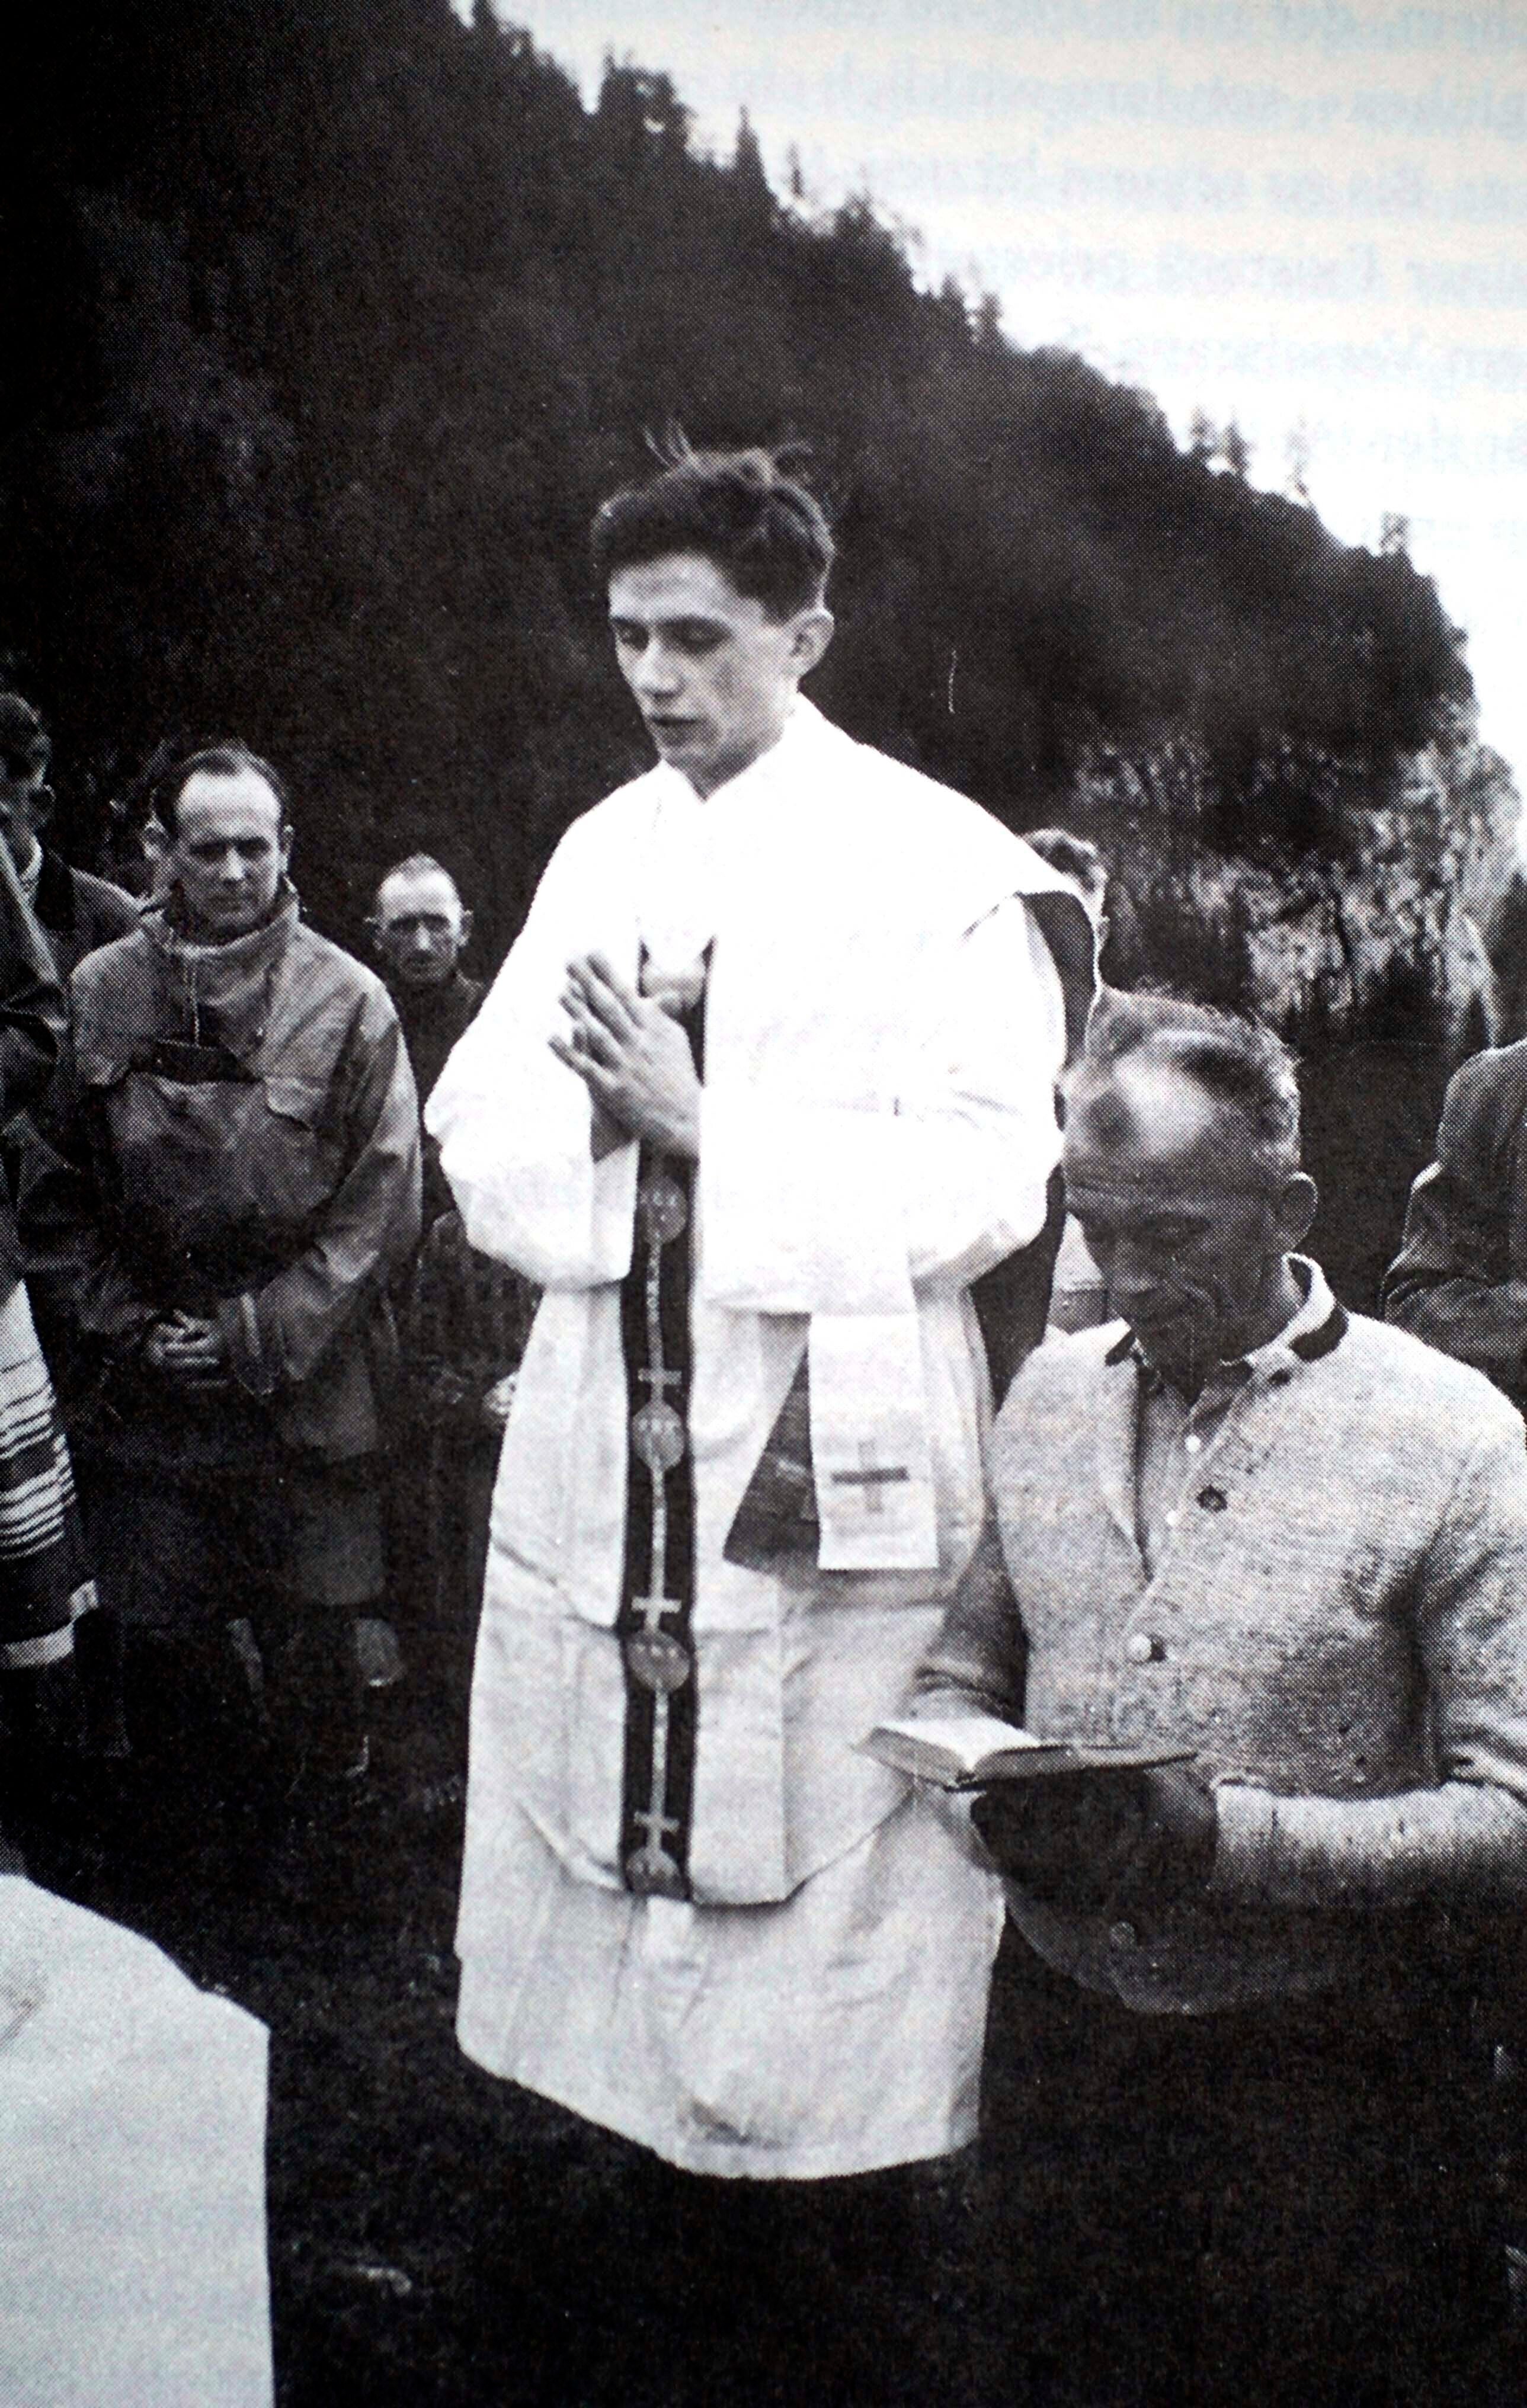 Priest Joseph Ratzinger prays during an open air Mass in Ruhpolding, southern Germany, in 1952